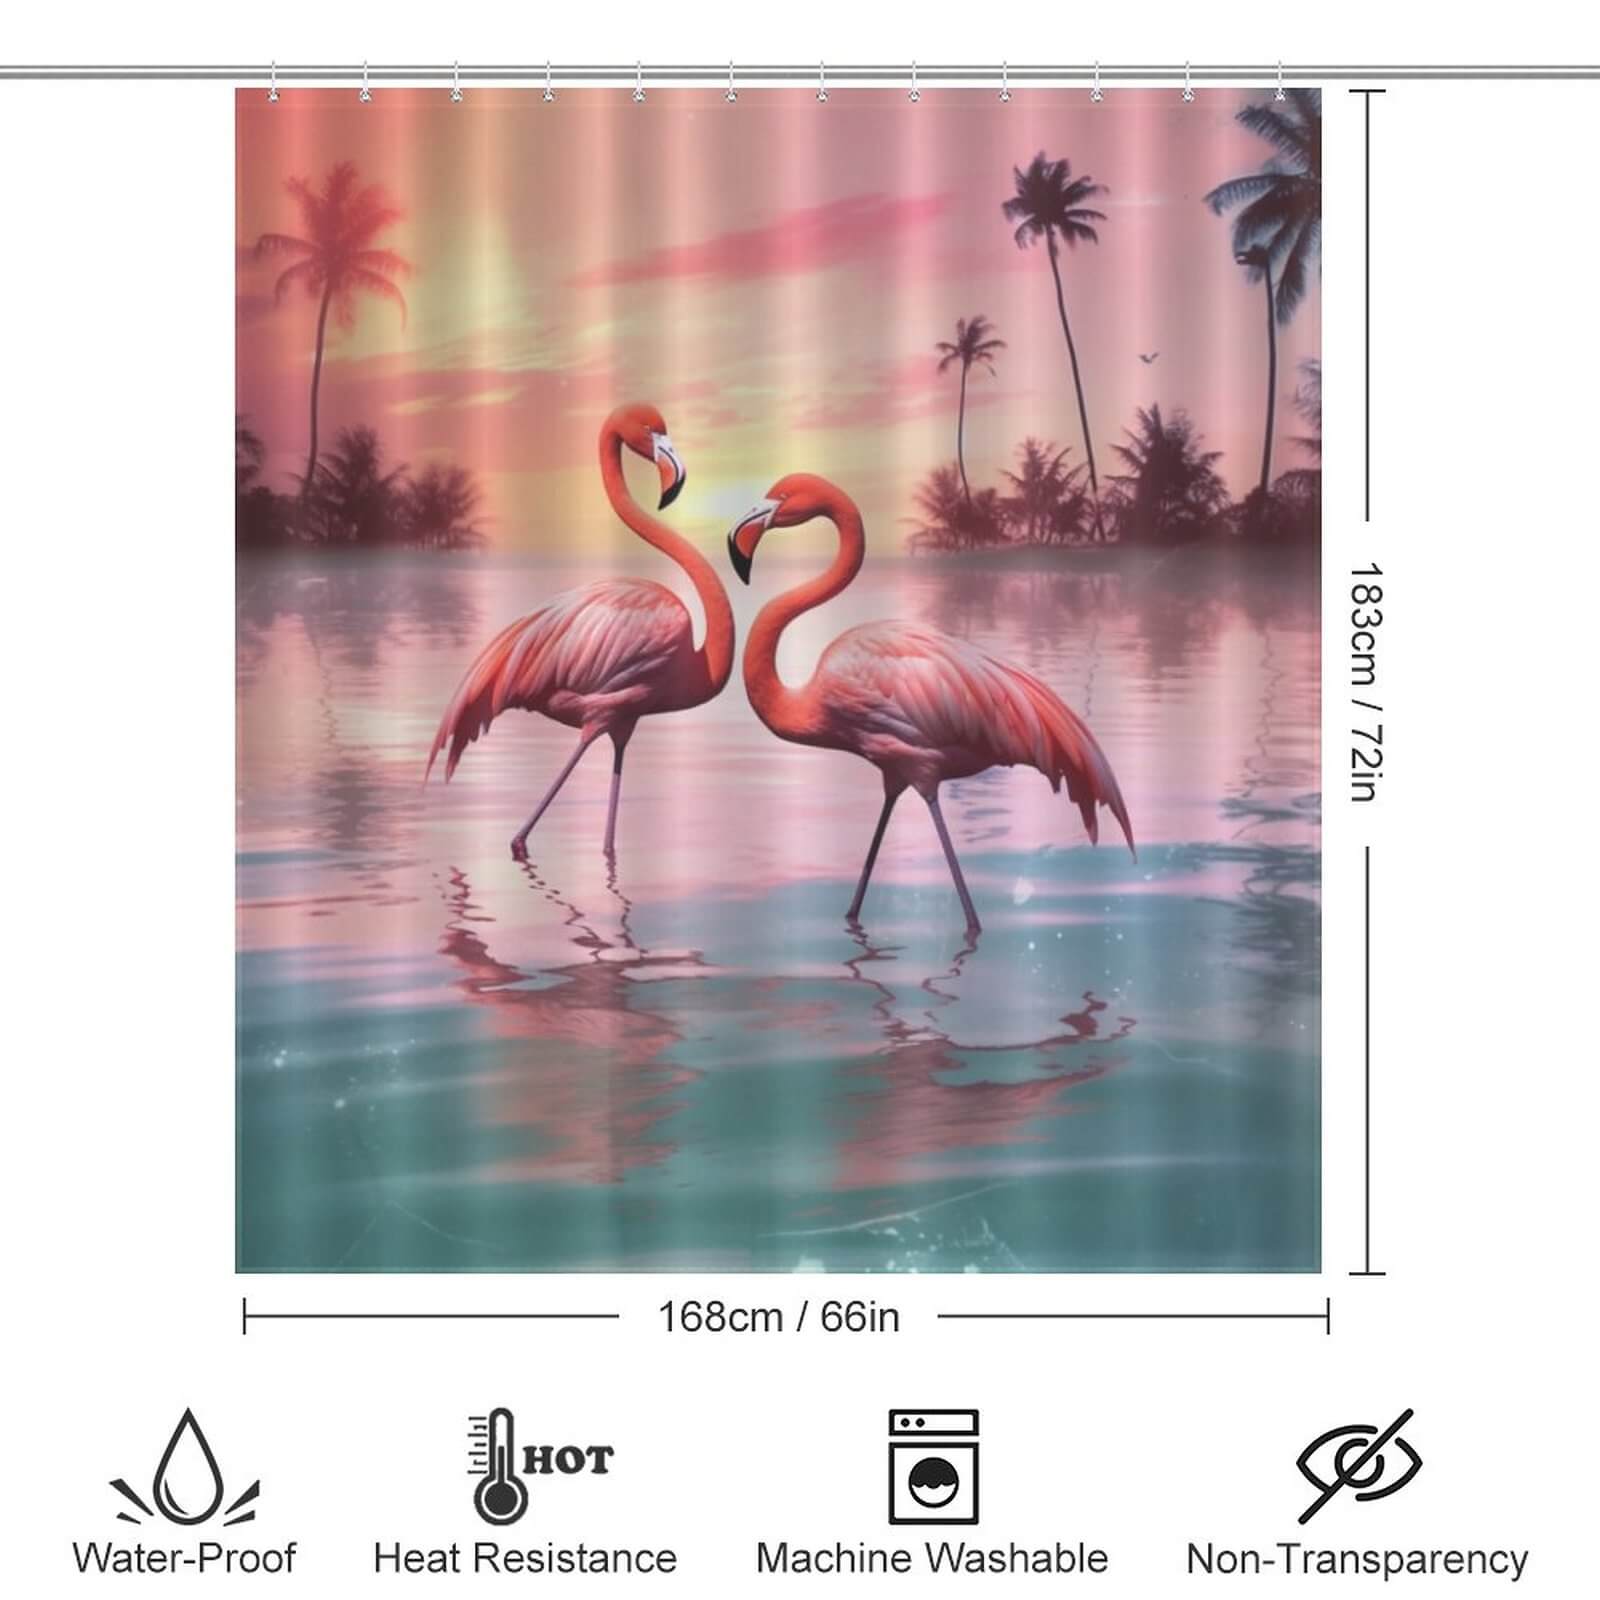 A waterproof Ocean Beach Flamingo Shower Curtain-Cottoncat captures the essence of a tropical paradise, featuring two flamingos gracefully standing in the water at sunset.